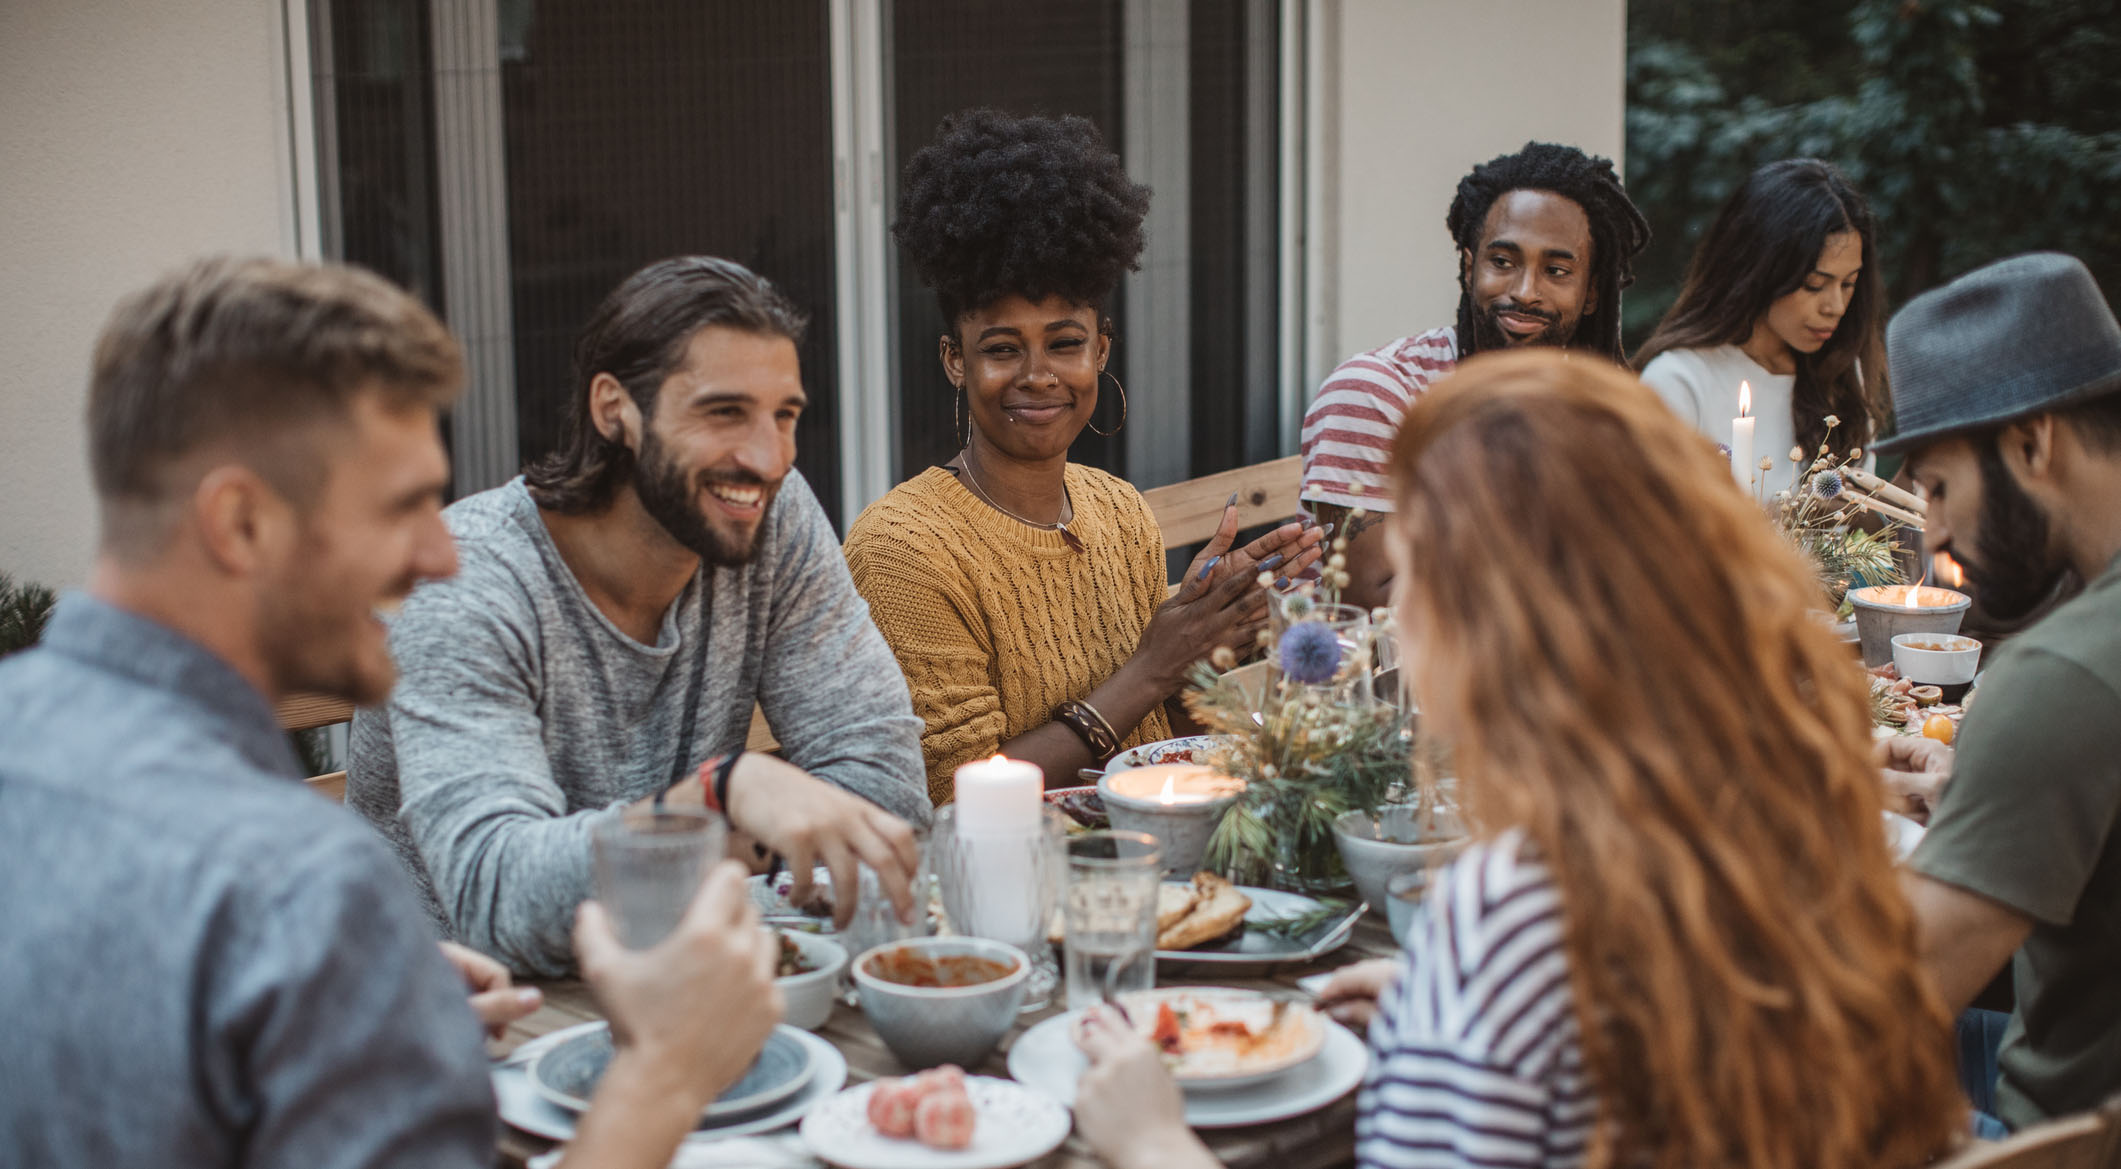 5 Simple Steps to Transform Your Dinner Party & Create Meaningful